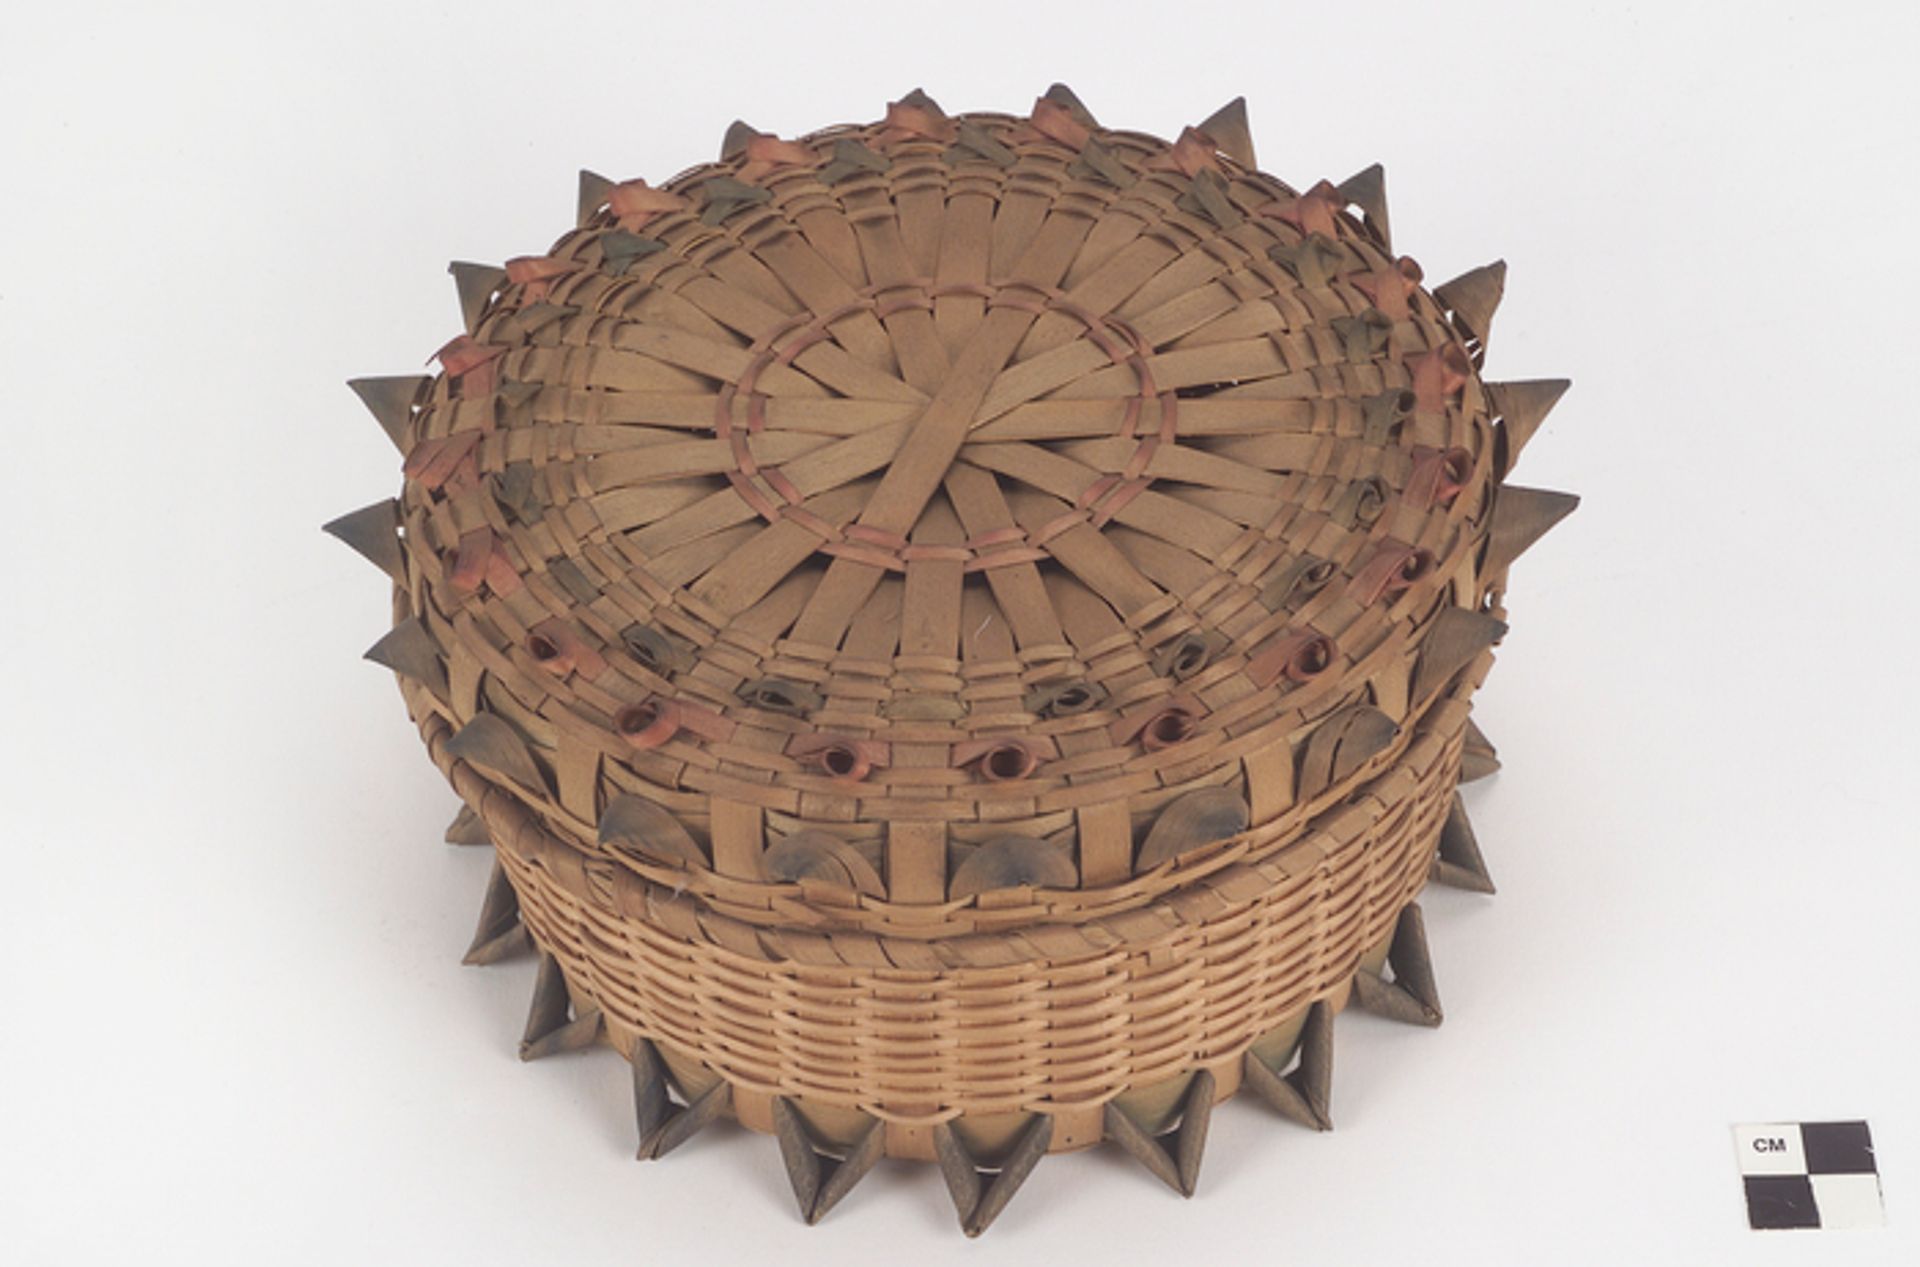 An example of a wicker-plaited Mi’kmaq basket in the National Museum of the American Indian’s collection. The basket was collected in 1911 by the anthropologist Wilson D. Wallis during field work in New Brunswick, Canada, that was partly sponsored by the University of Pennsylvania Museum of Archaeology and Anthropology. Smithsonian National Museum of the American Indian.